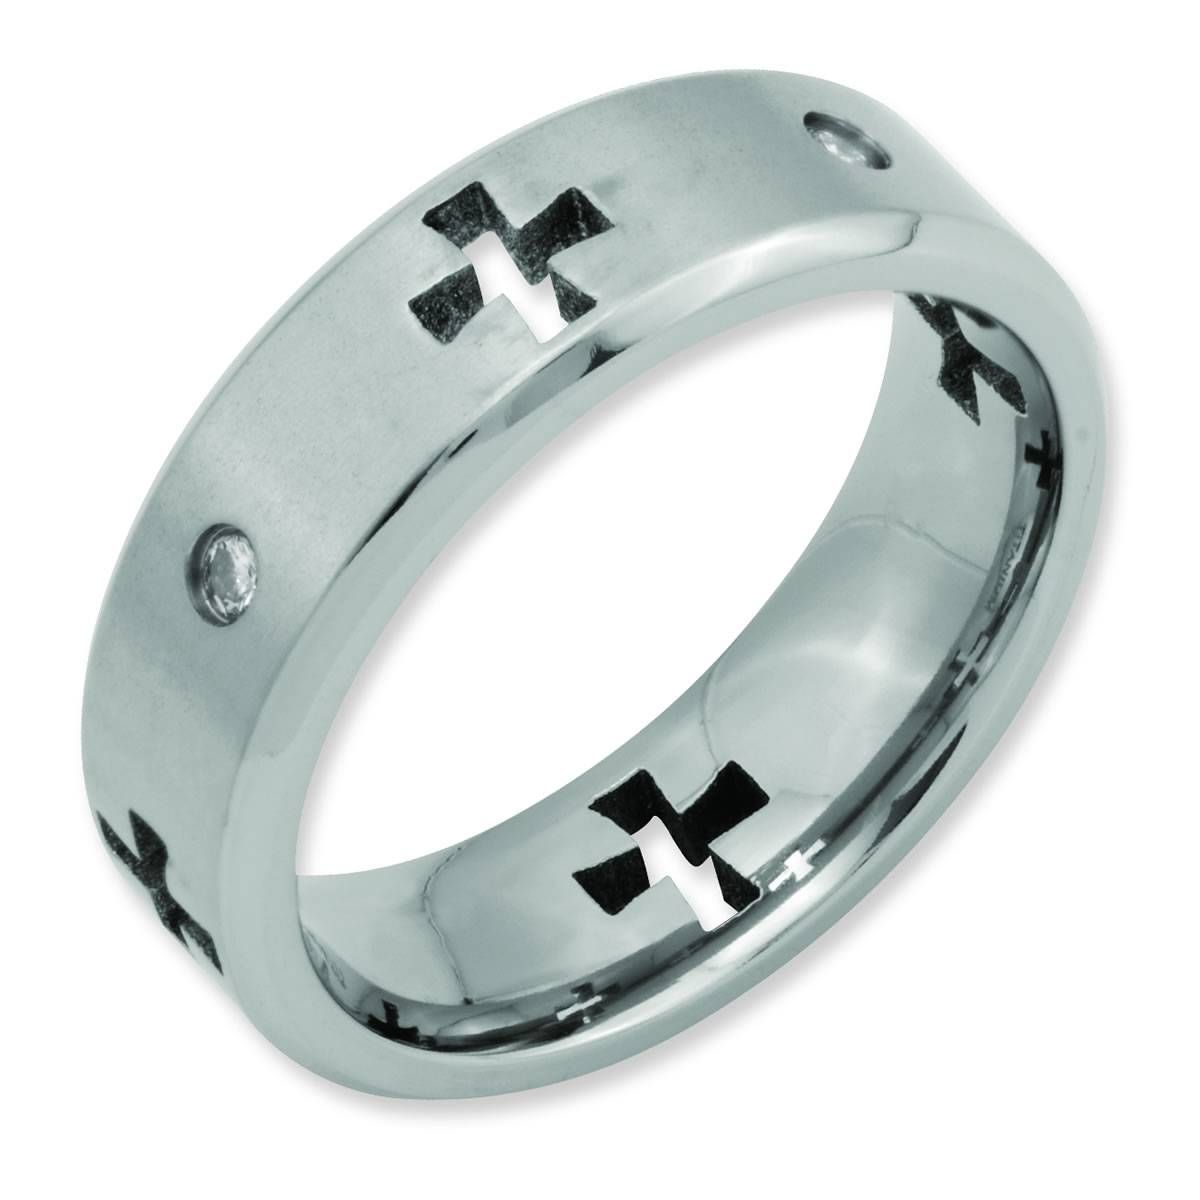 Titanium Celtic Cross Cut Out With Diamond 7mm Brushed Men's Intended For Mens Cross Wedding Bands (View 13 of 15)